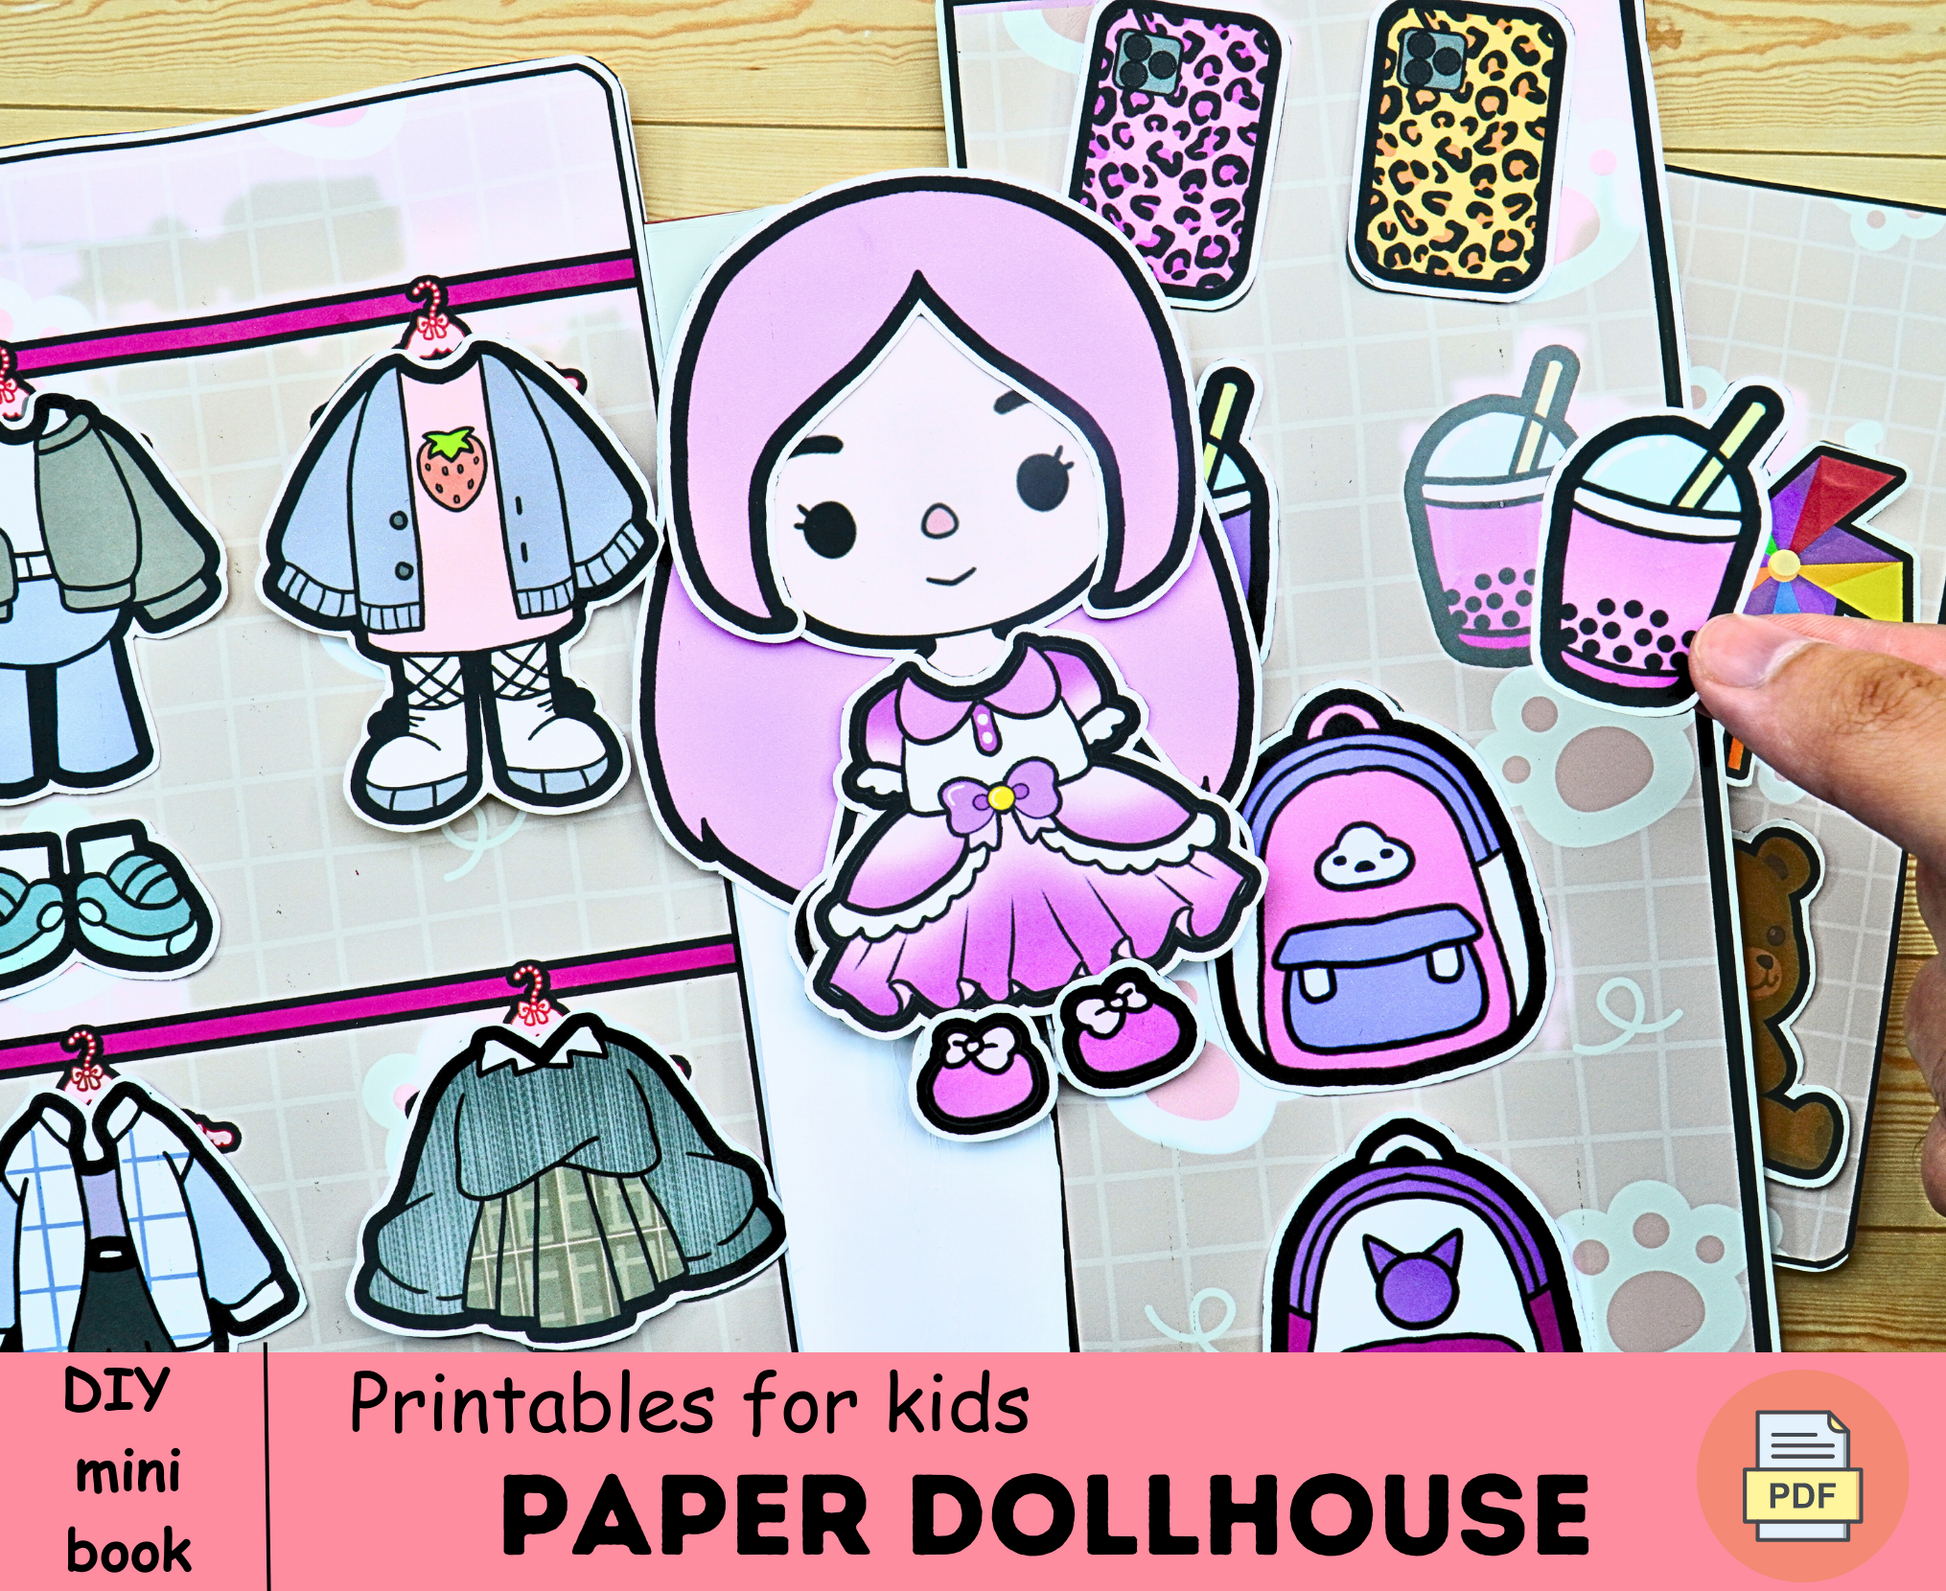 Printable Toca Boca Paper Doll Green Style / Dress up Doll / 